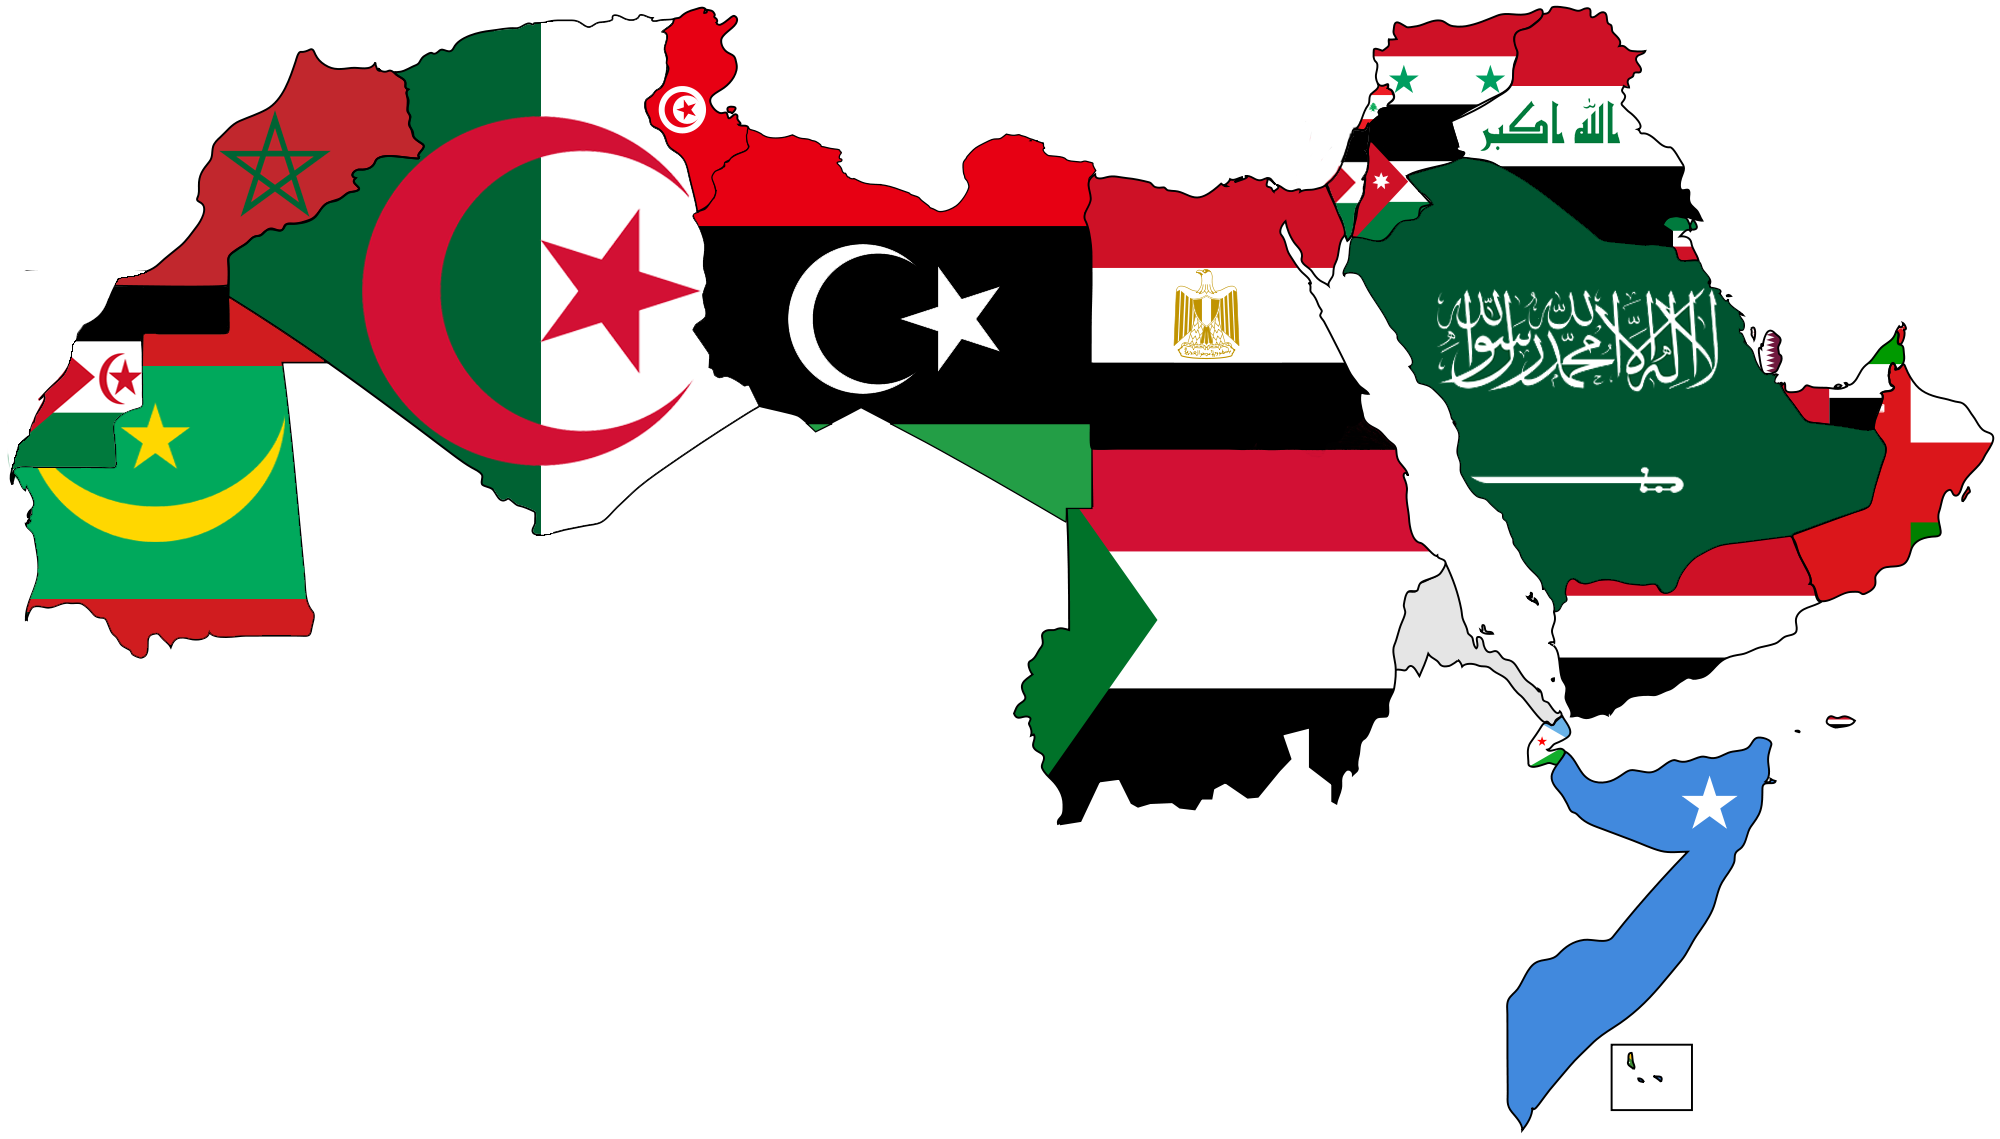 A_map_of_the_Arab_World_with_flags.png